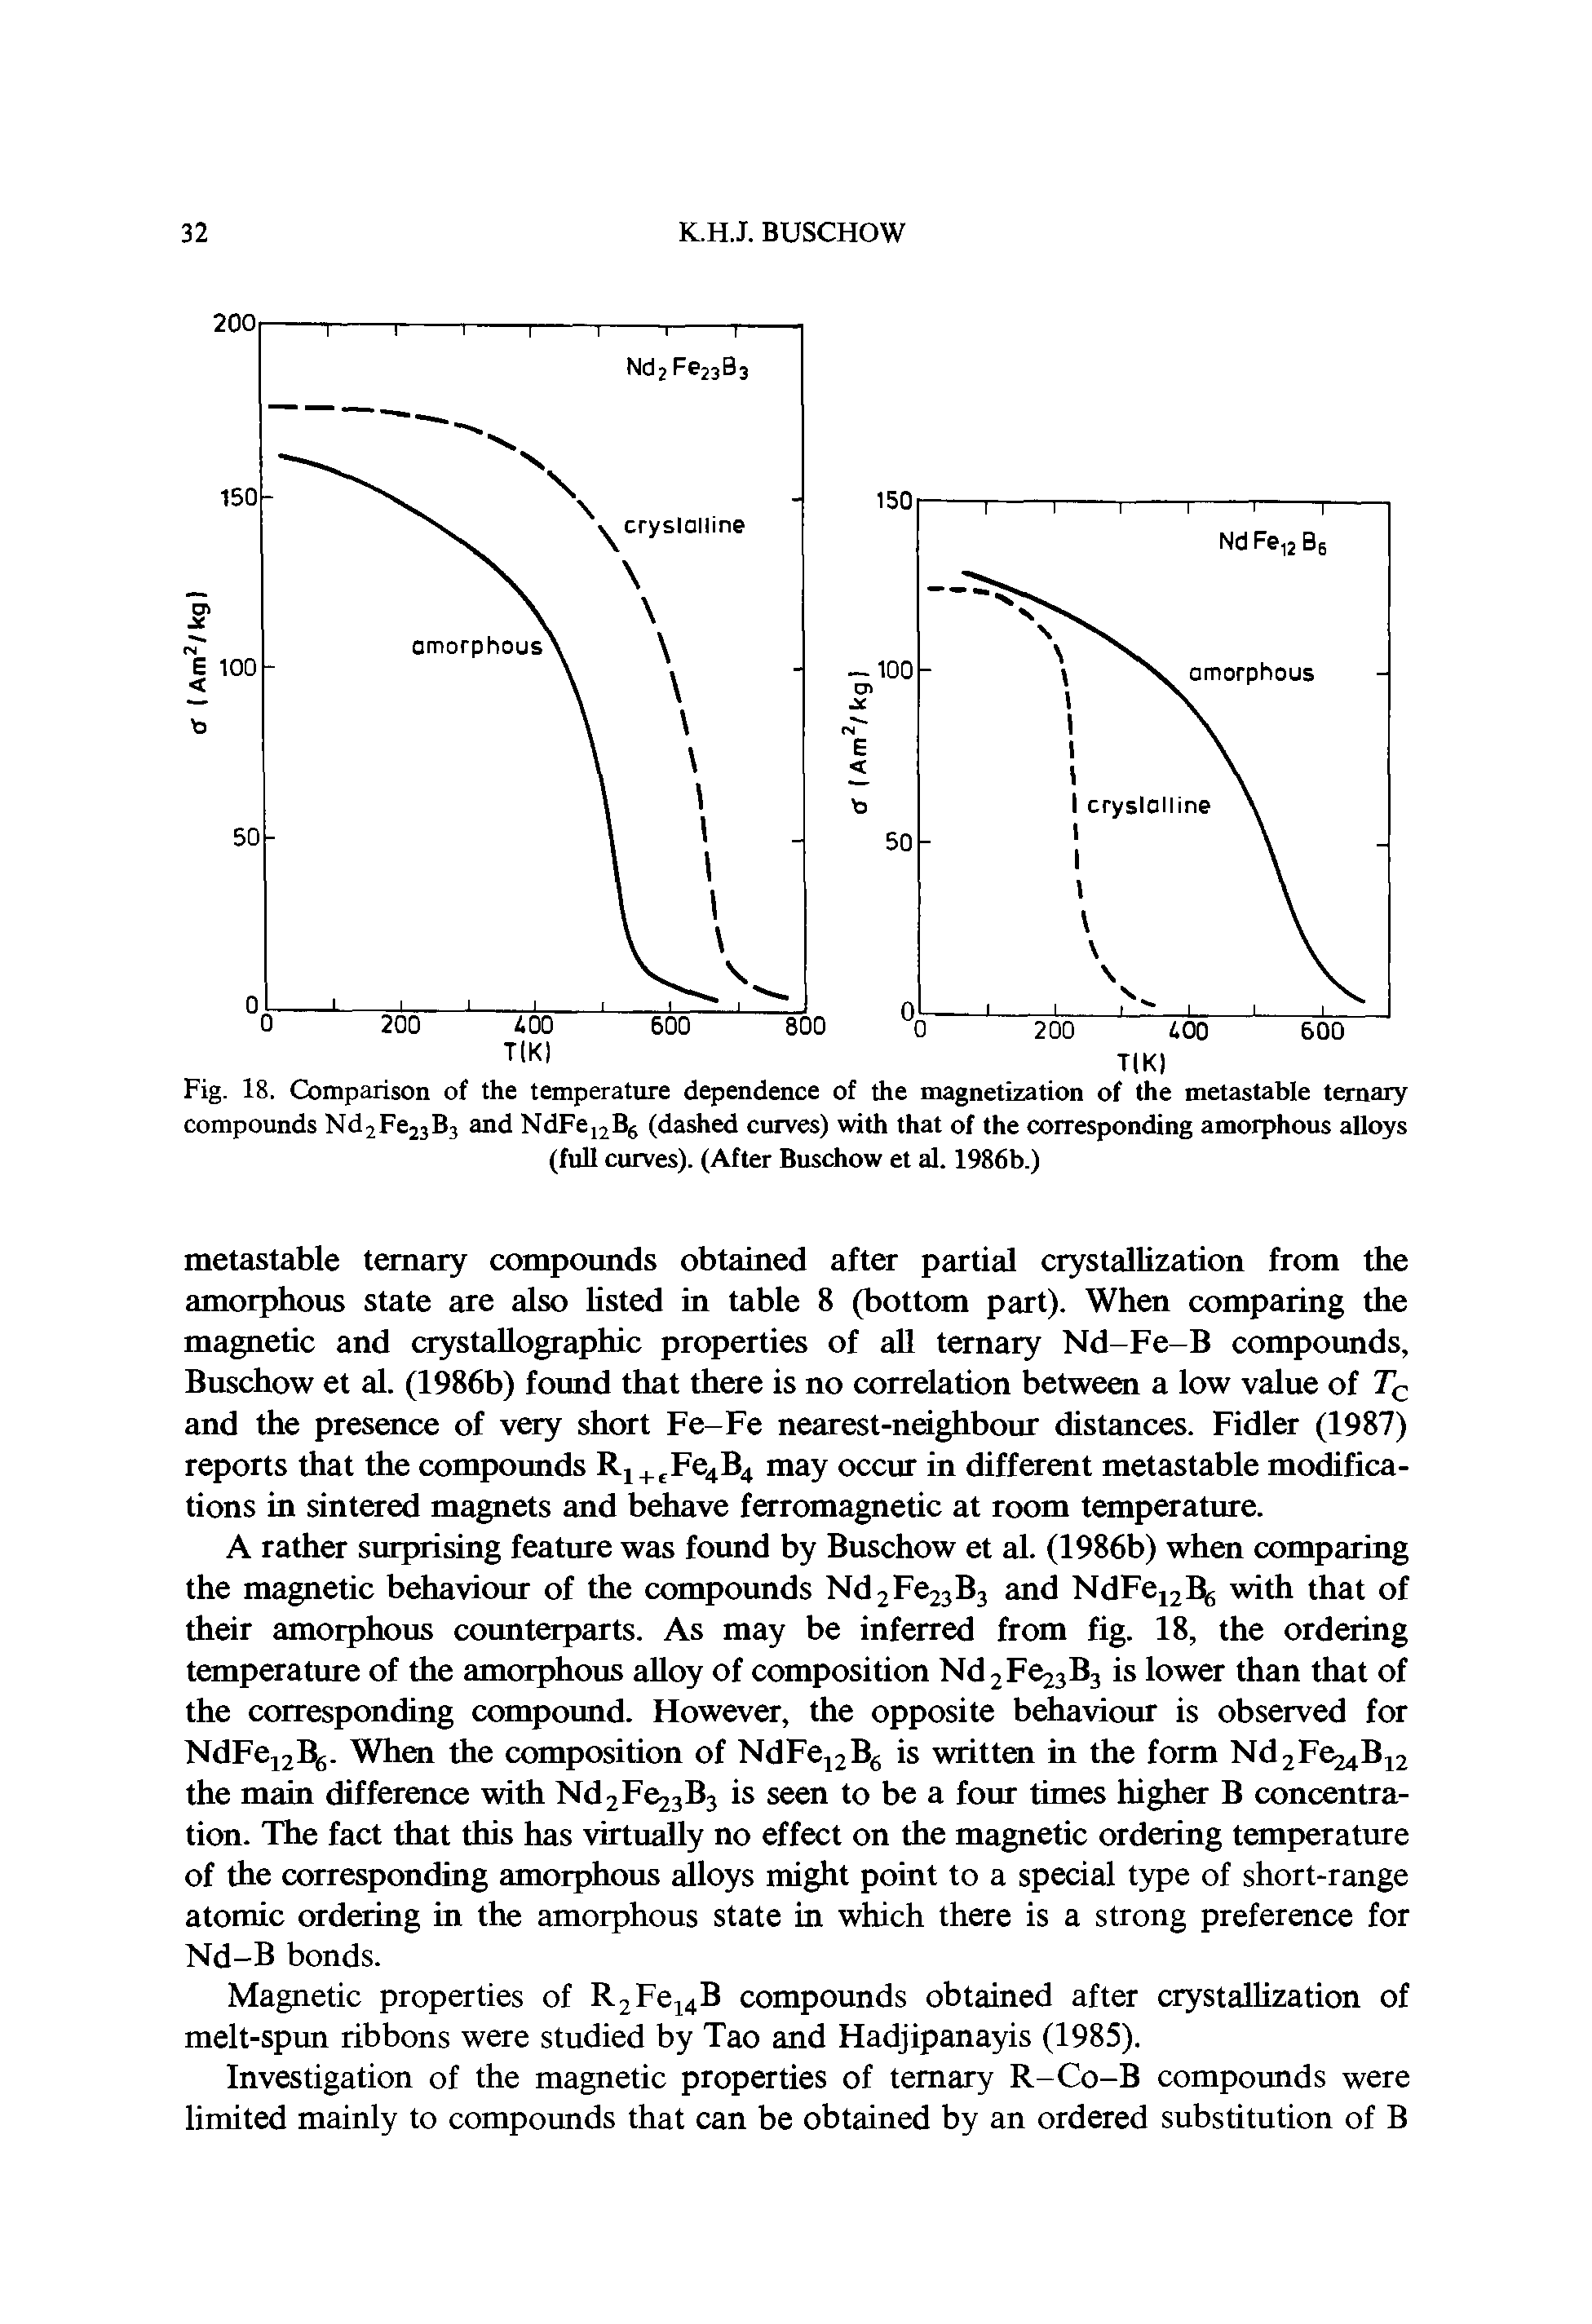 Fig. 18. Comparison of the temperature dependence of the magnetization of the metastable ternary compounds Nd2Fe23B3 and NdFe12B6 (dashed curves) with that of the corresponding amorphous alloys (full curves). (After Buschow et al. 1986b.)...